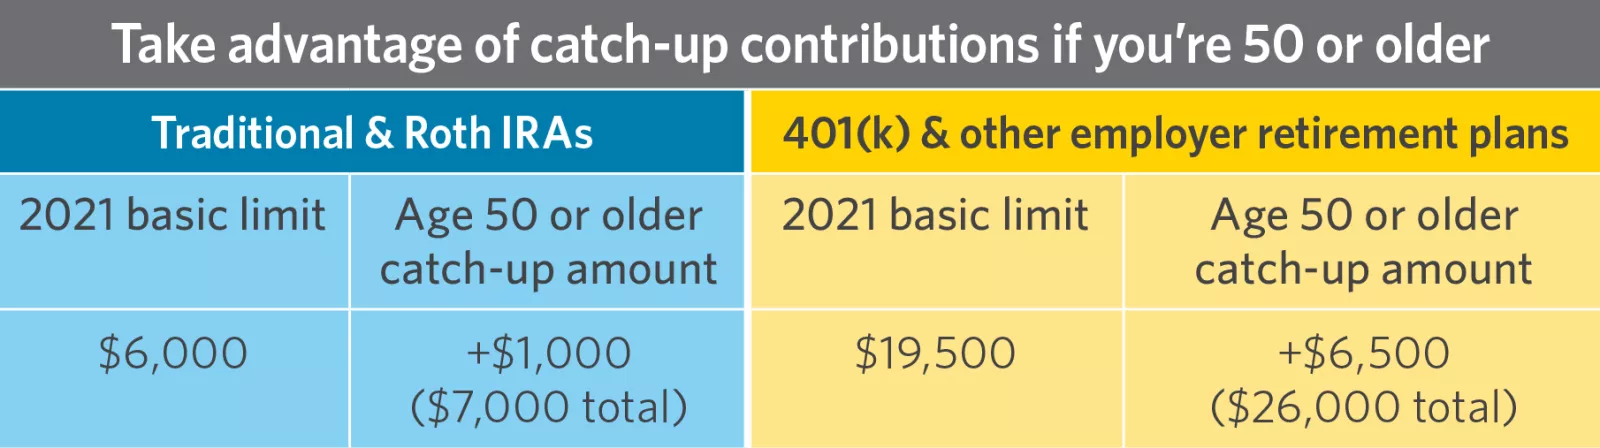  Chart showing catch-up contributions for IRAs, 401(k)s and other employer retirement plans.
